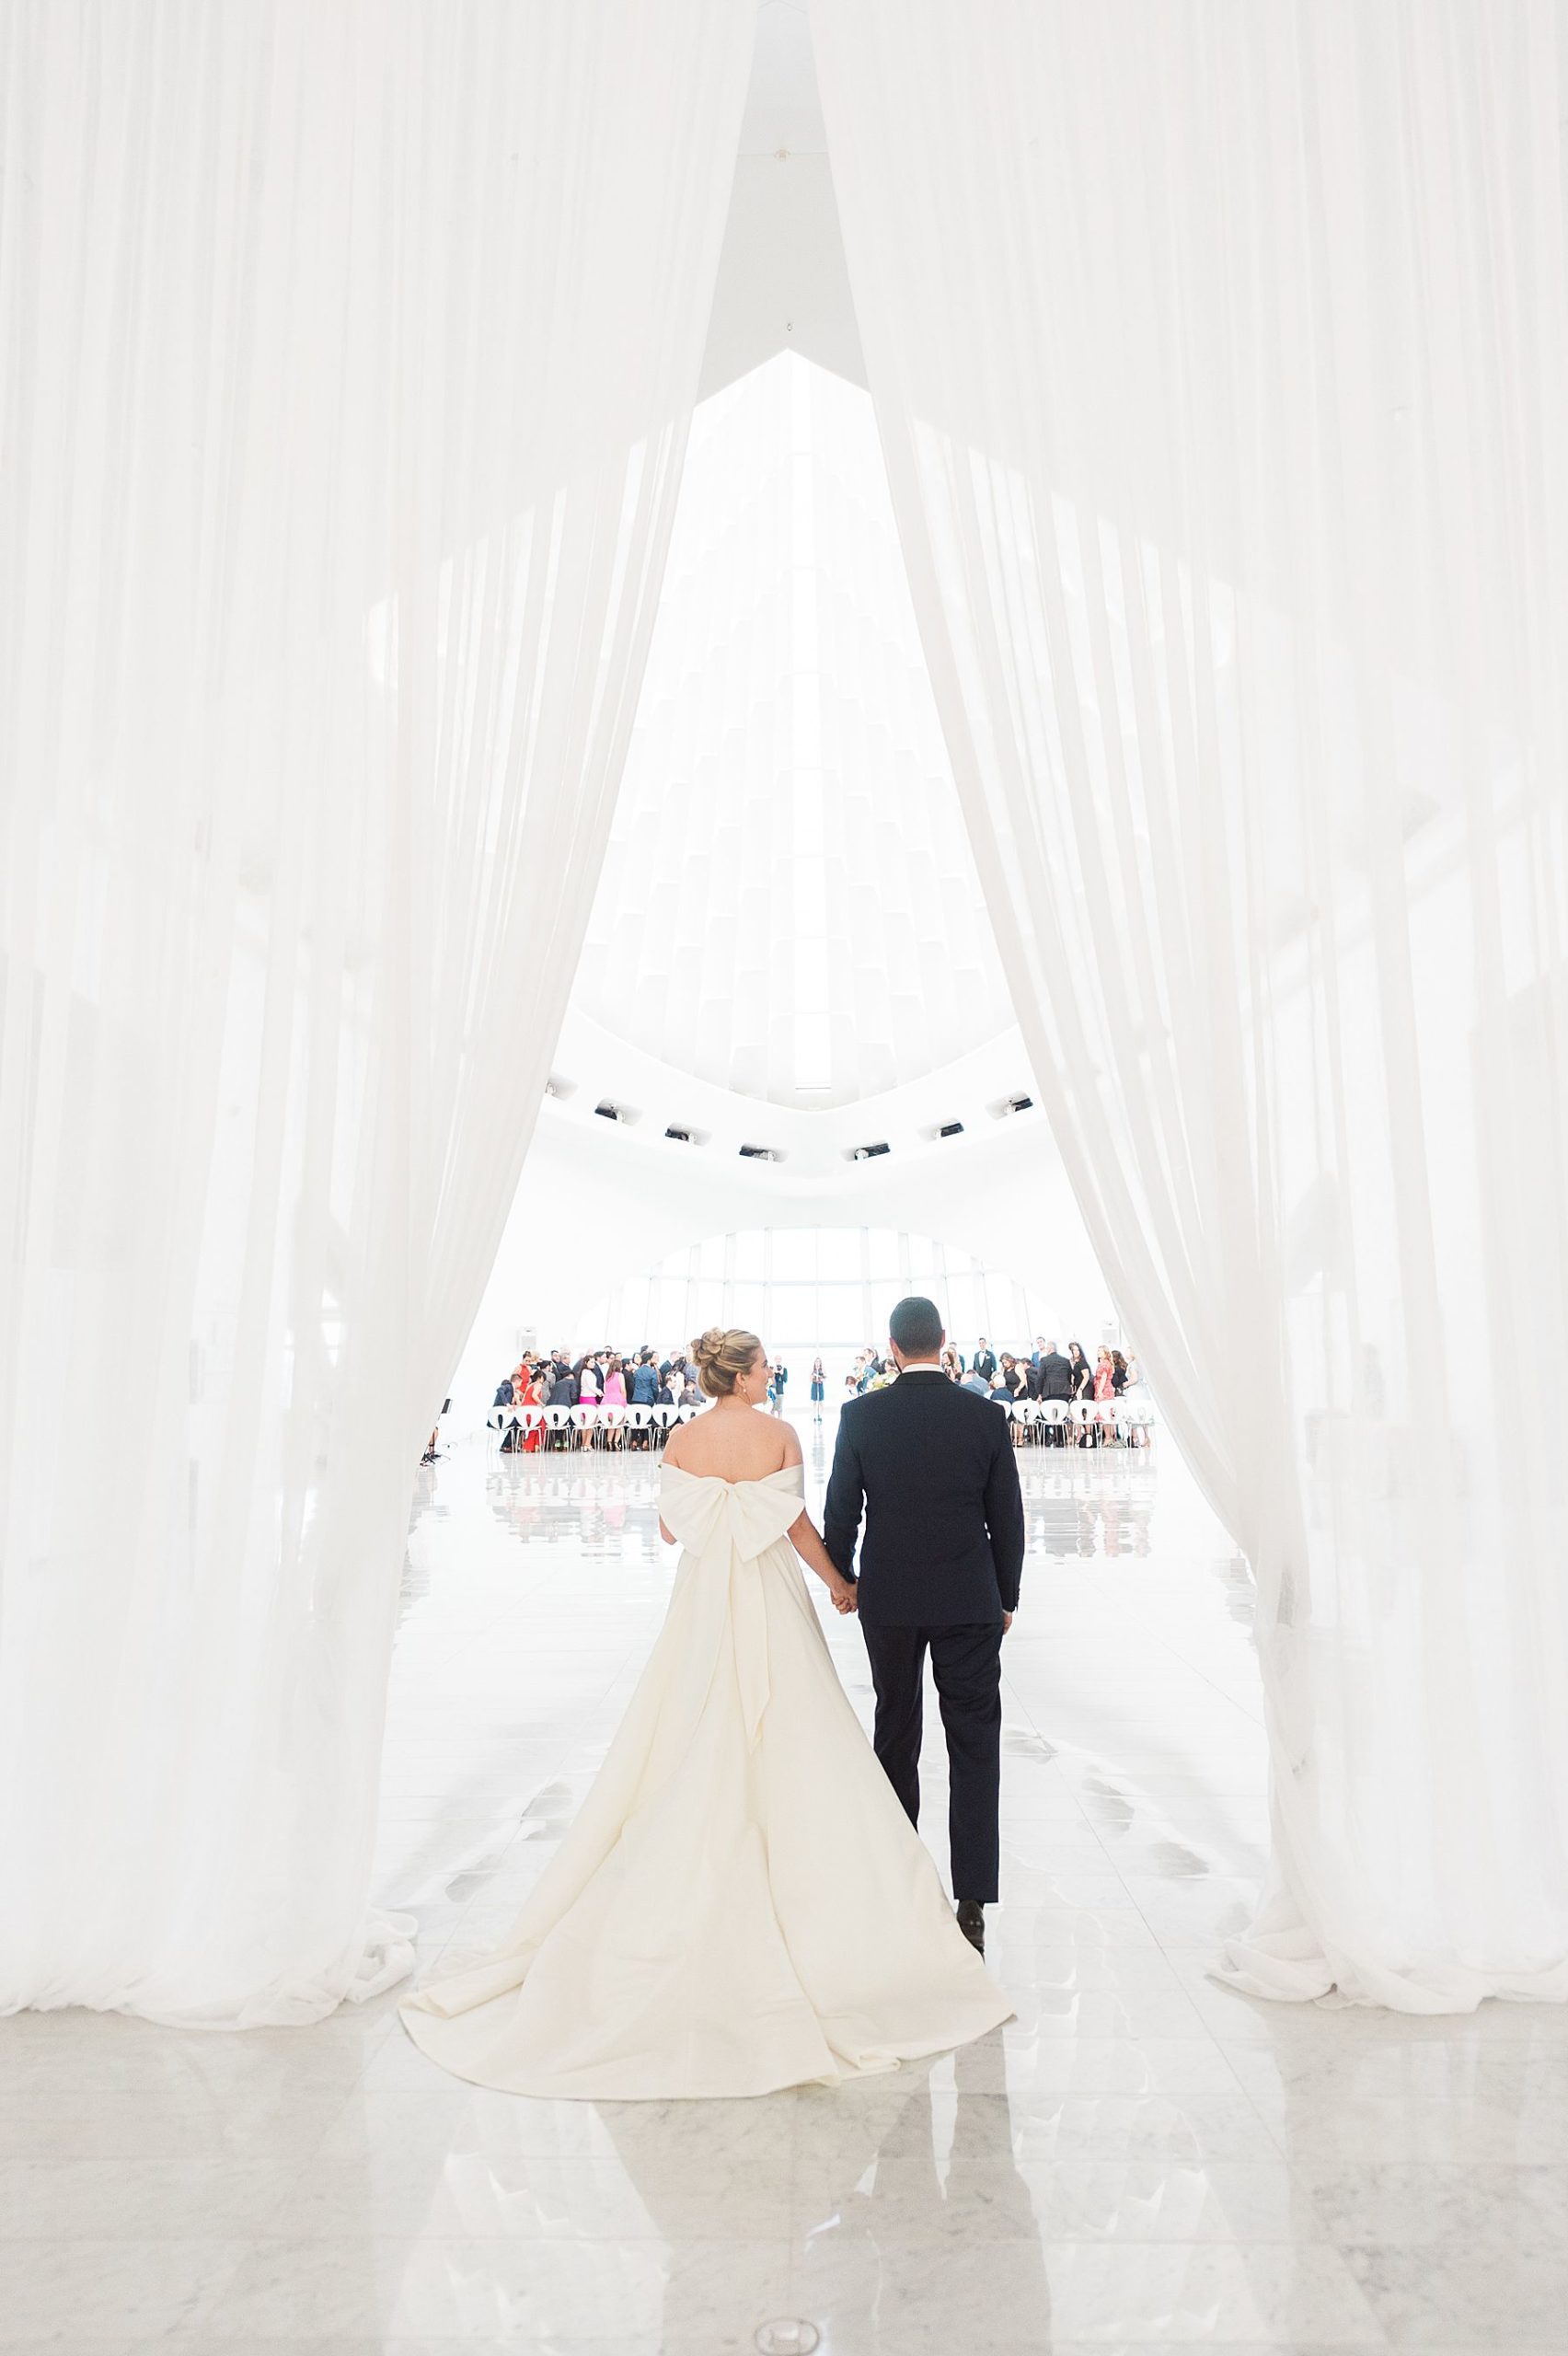 couple entrance, modern minimal white and bright wedding ceremony at milwaukee art museum an architectural gem downtown with lake michigan view